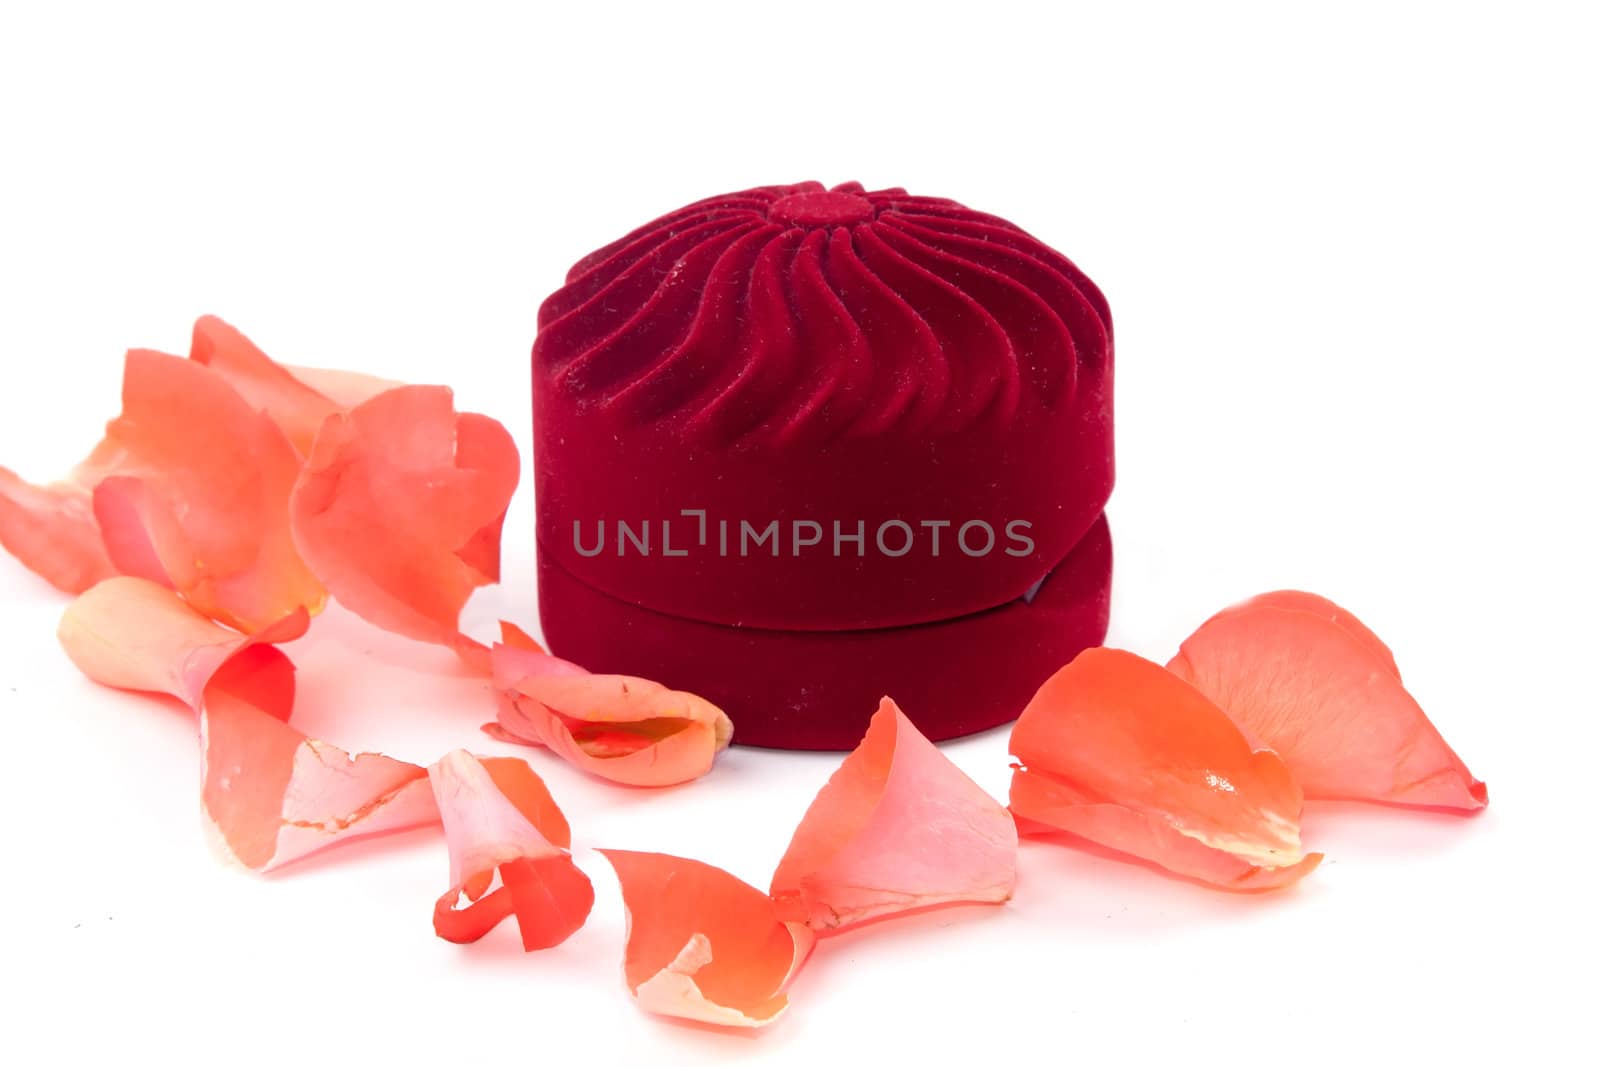 Closed box and lying next to rose petals on white background